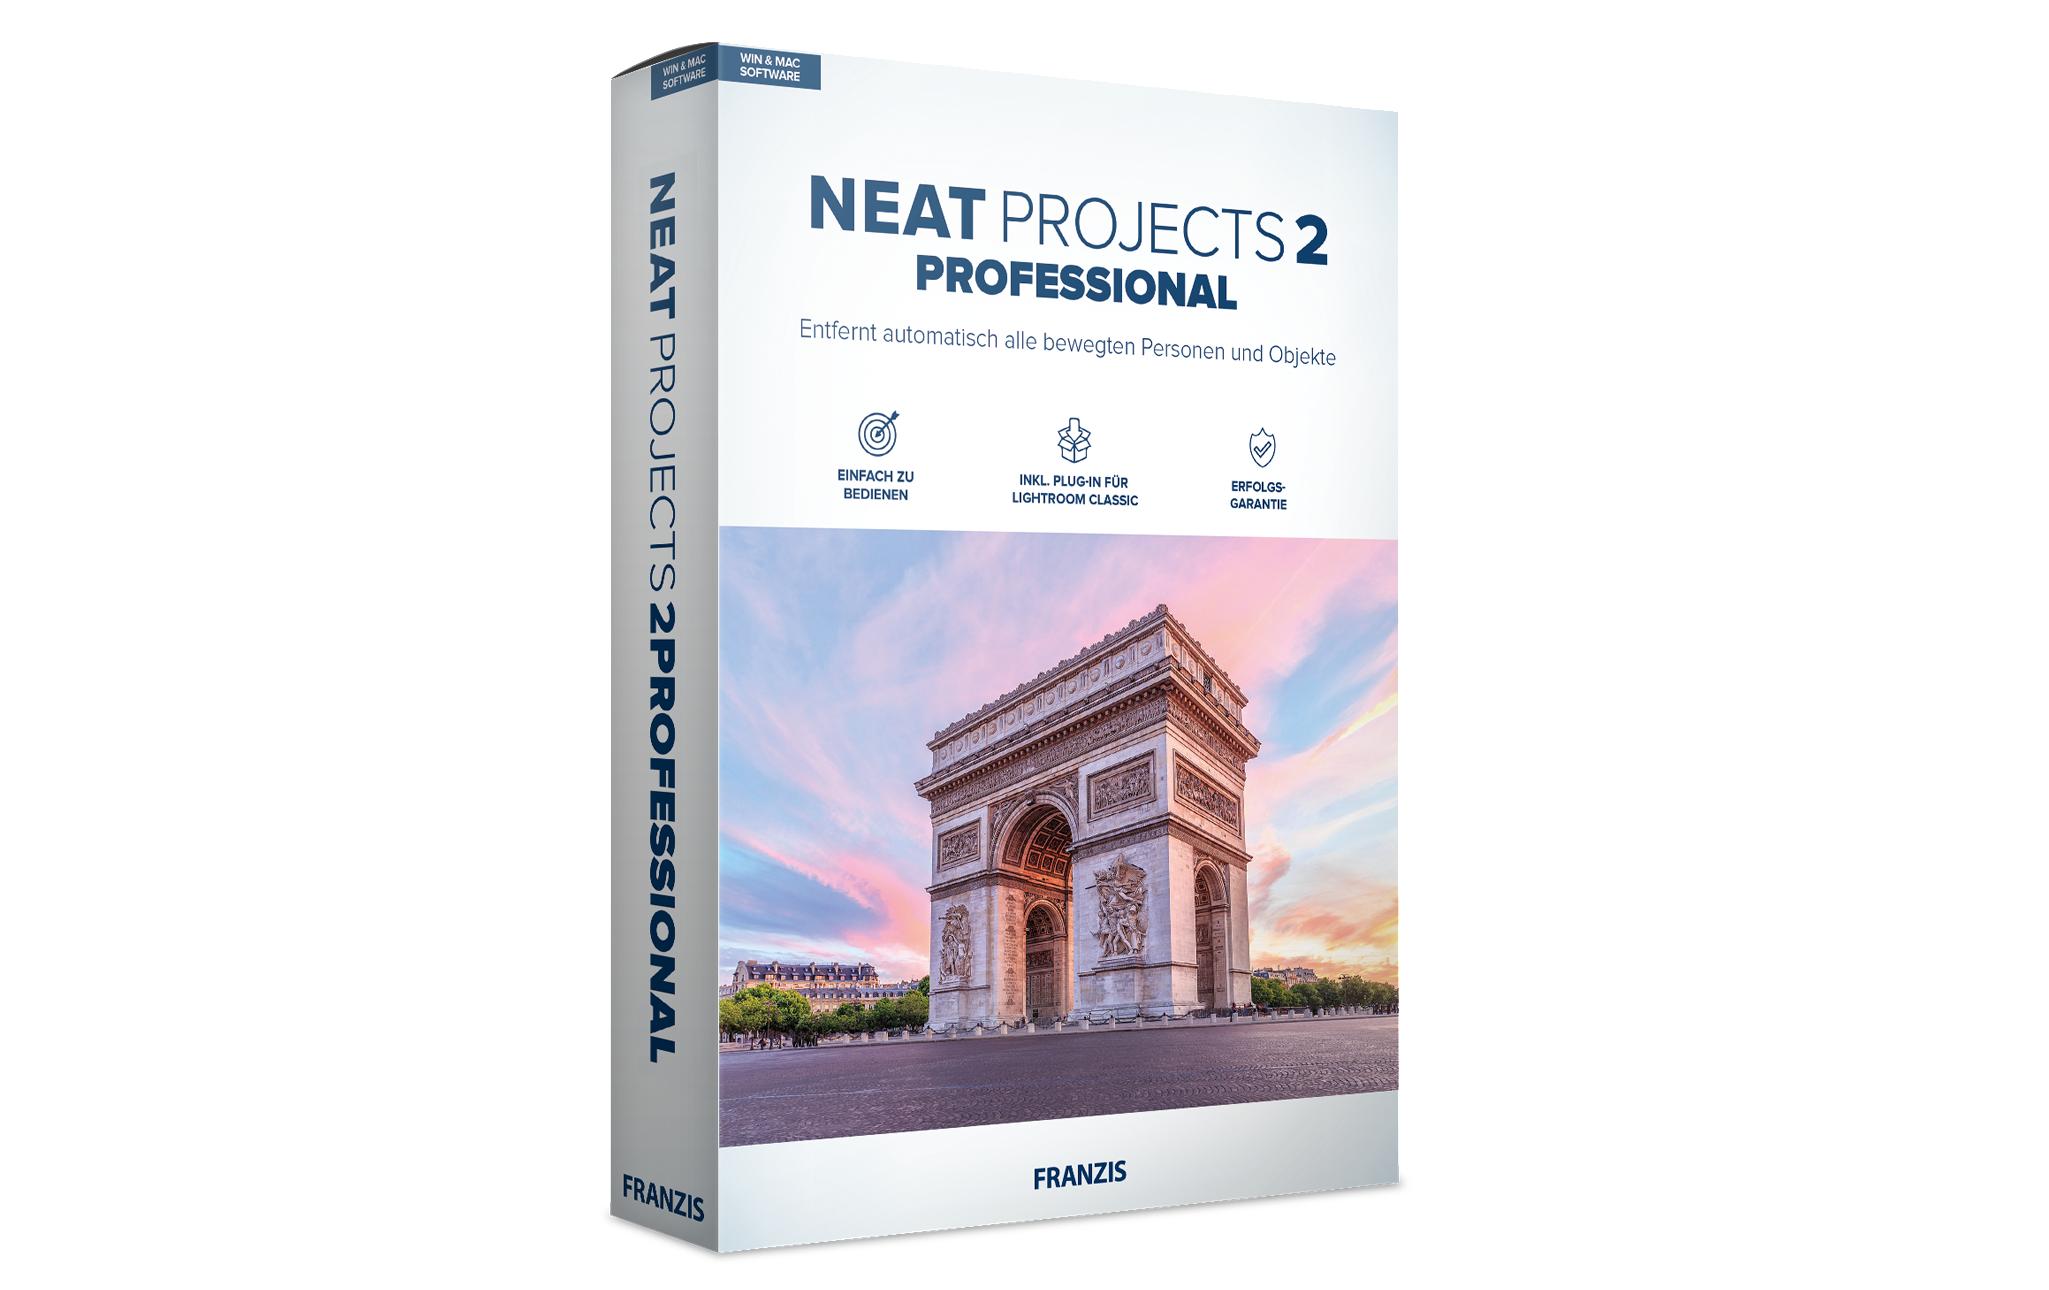 Franzis NEAT Projects 2 Professional